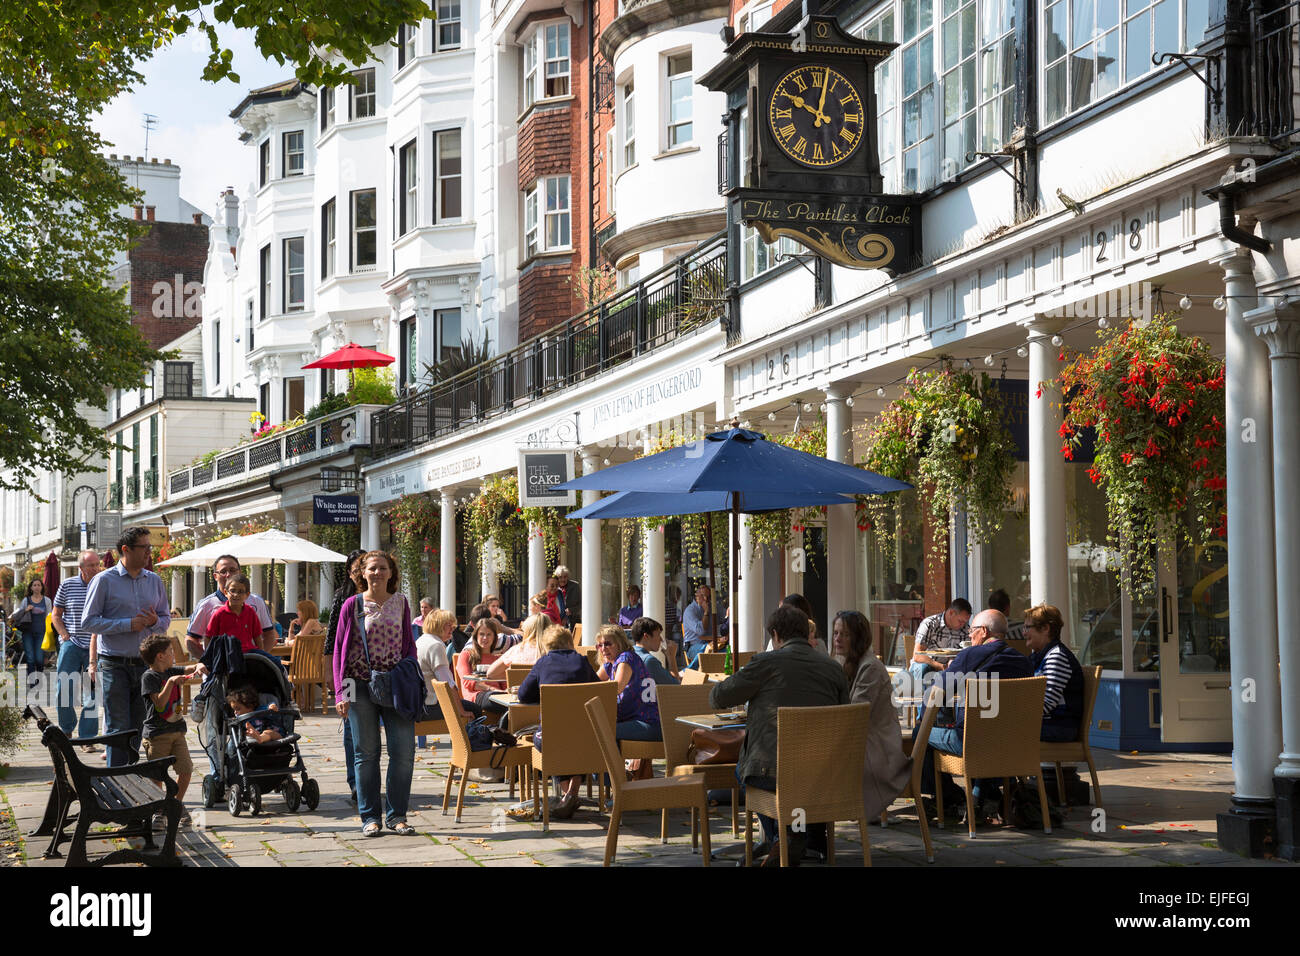 Street scene at The Pantiles crowded pedestrian area of Tunbridge Wells, shops and people eating at pavement cafes in Kent, England, UK Stock Photo